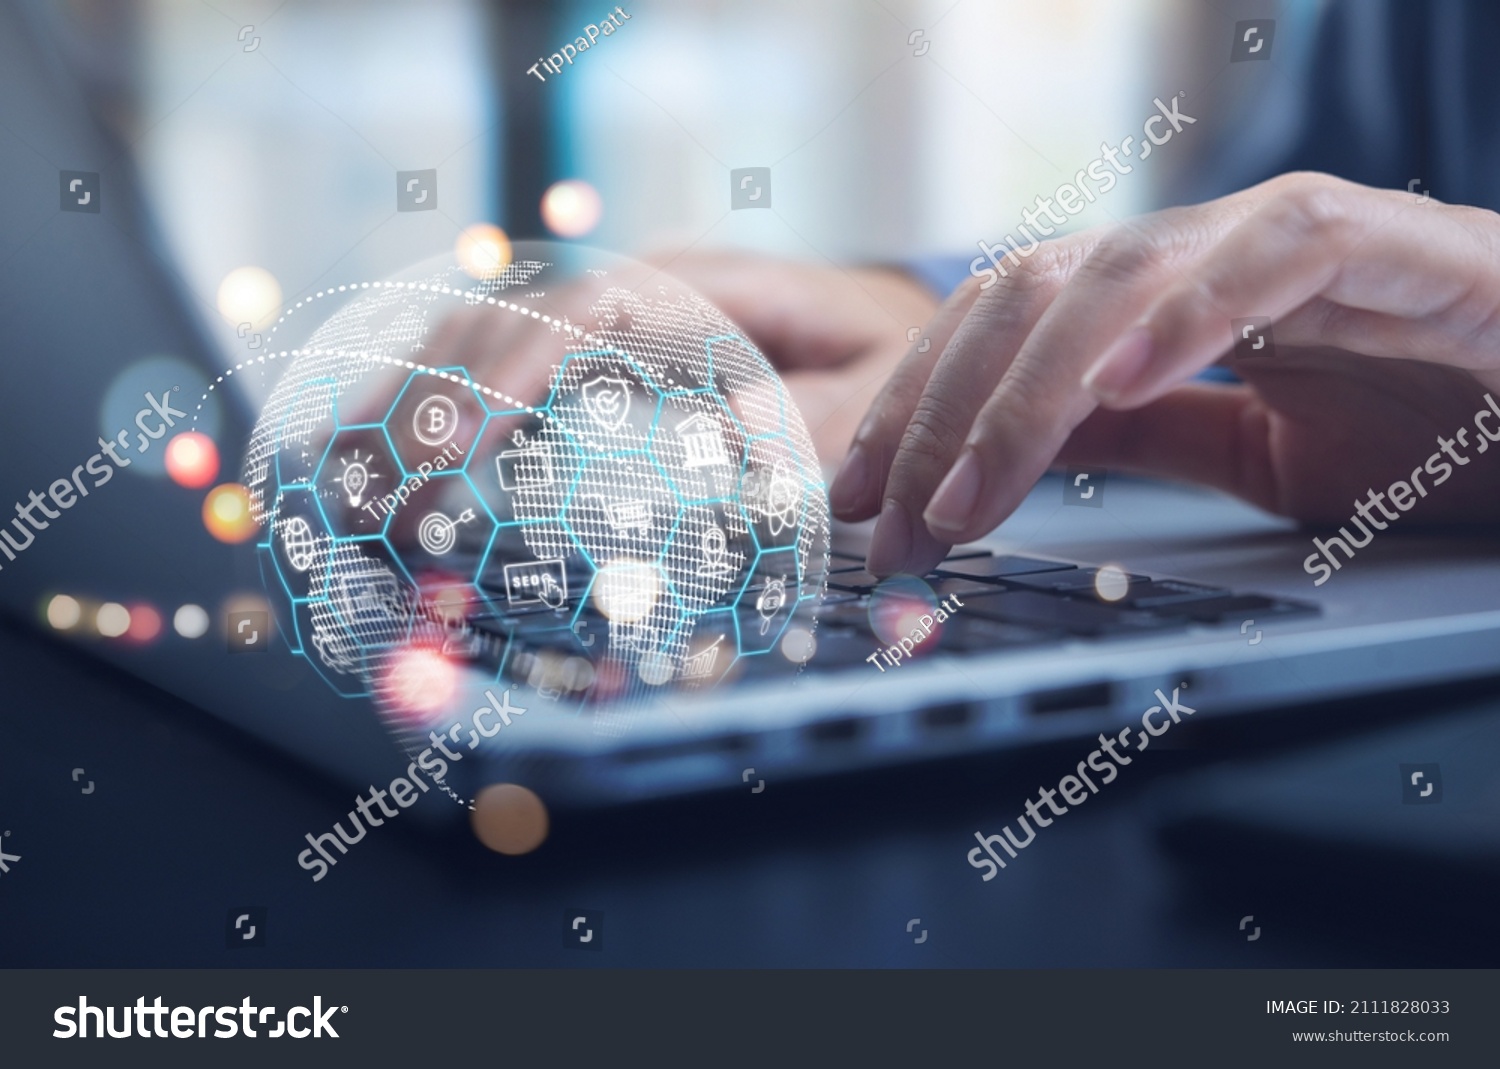 Internet of Things (IOT) technology, Woman using laptop computer with E-commerce technology icons on virtual global network, Global business, Social media marketing concept. #2111828033